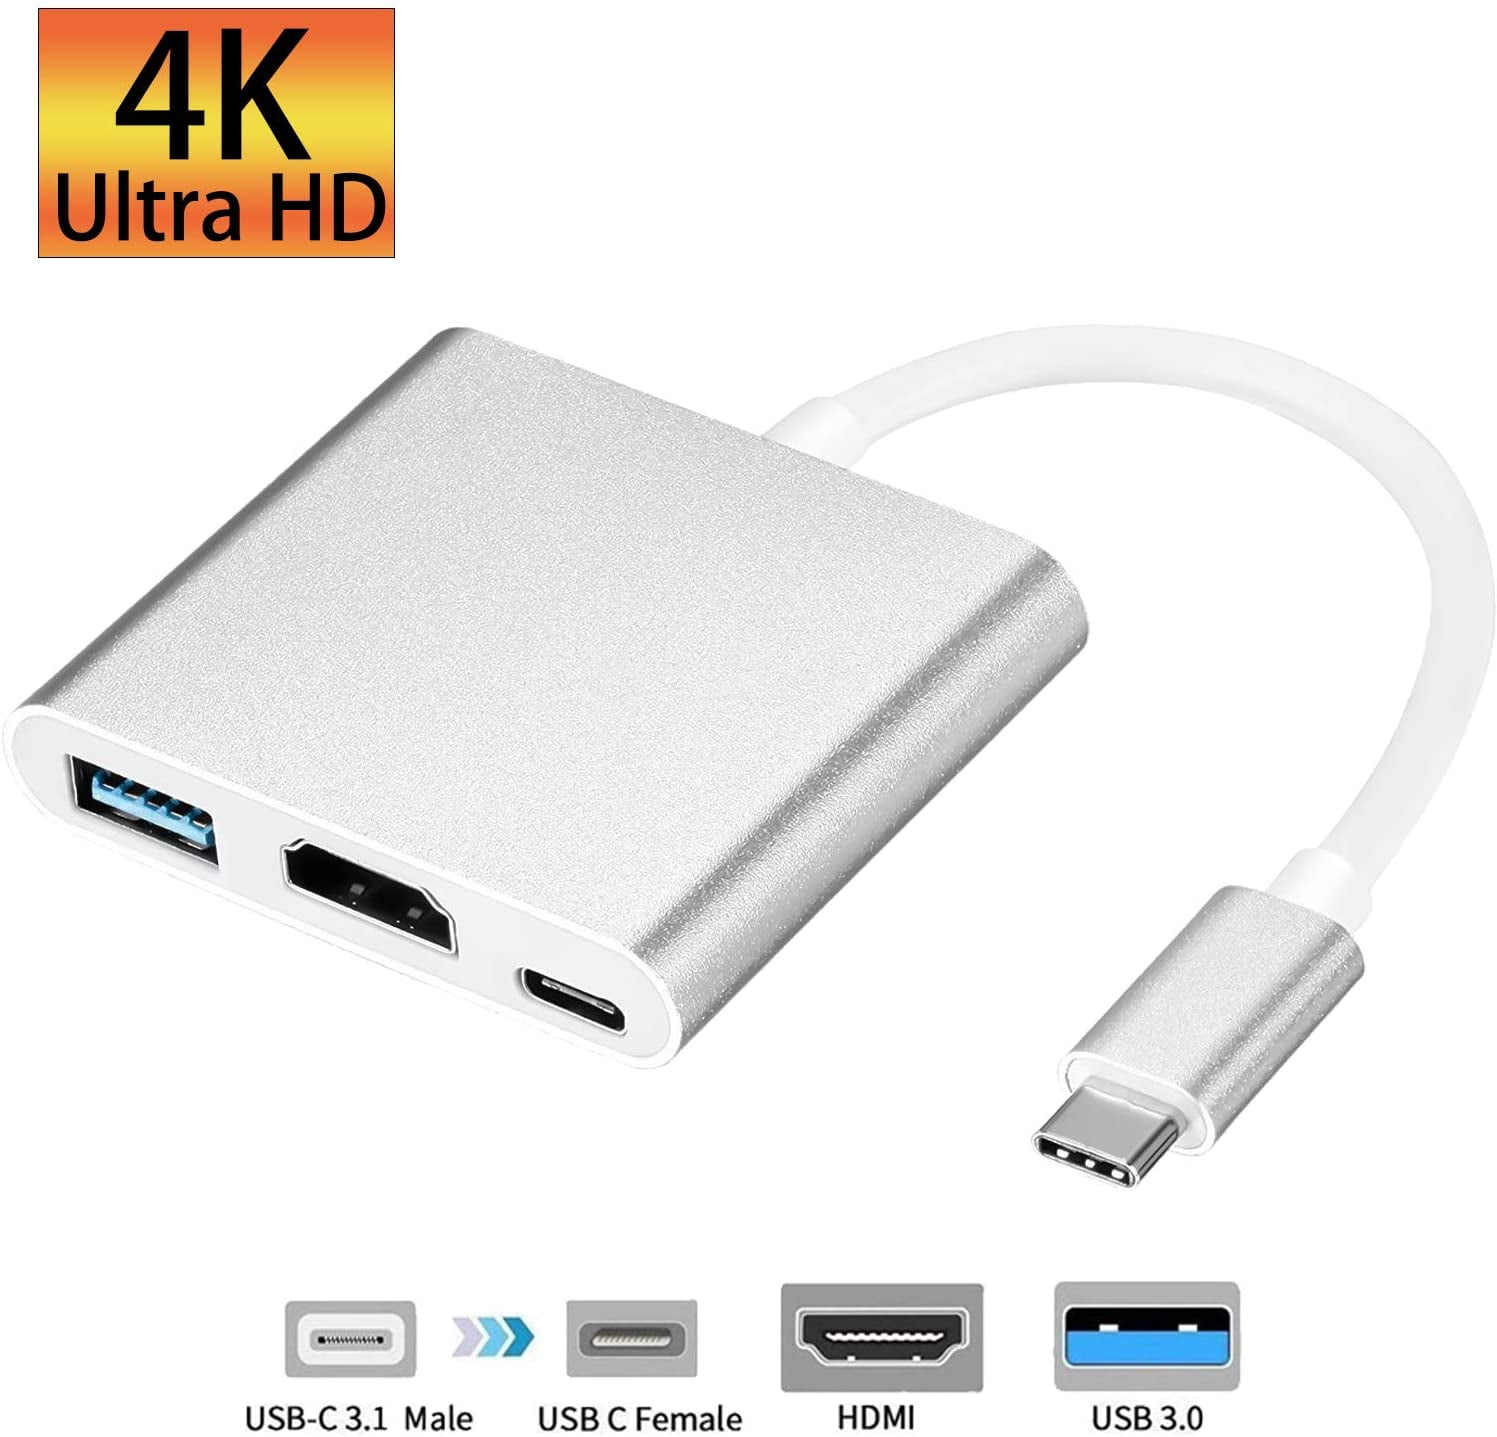 USB Type-C - HDMI Adapter with USB 3.0